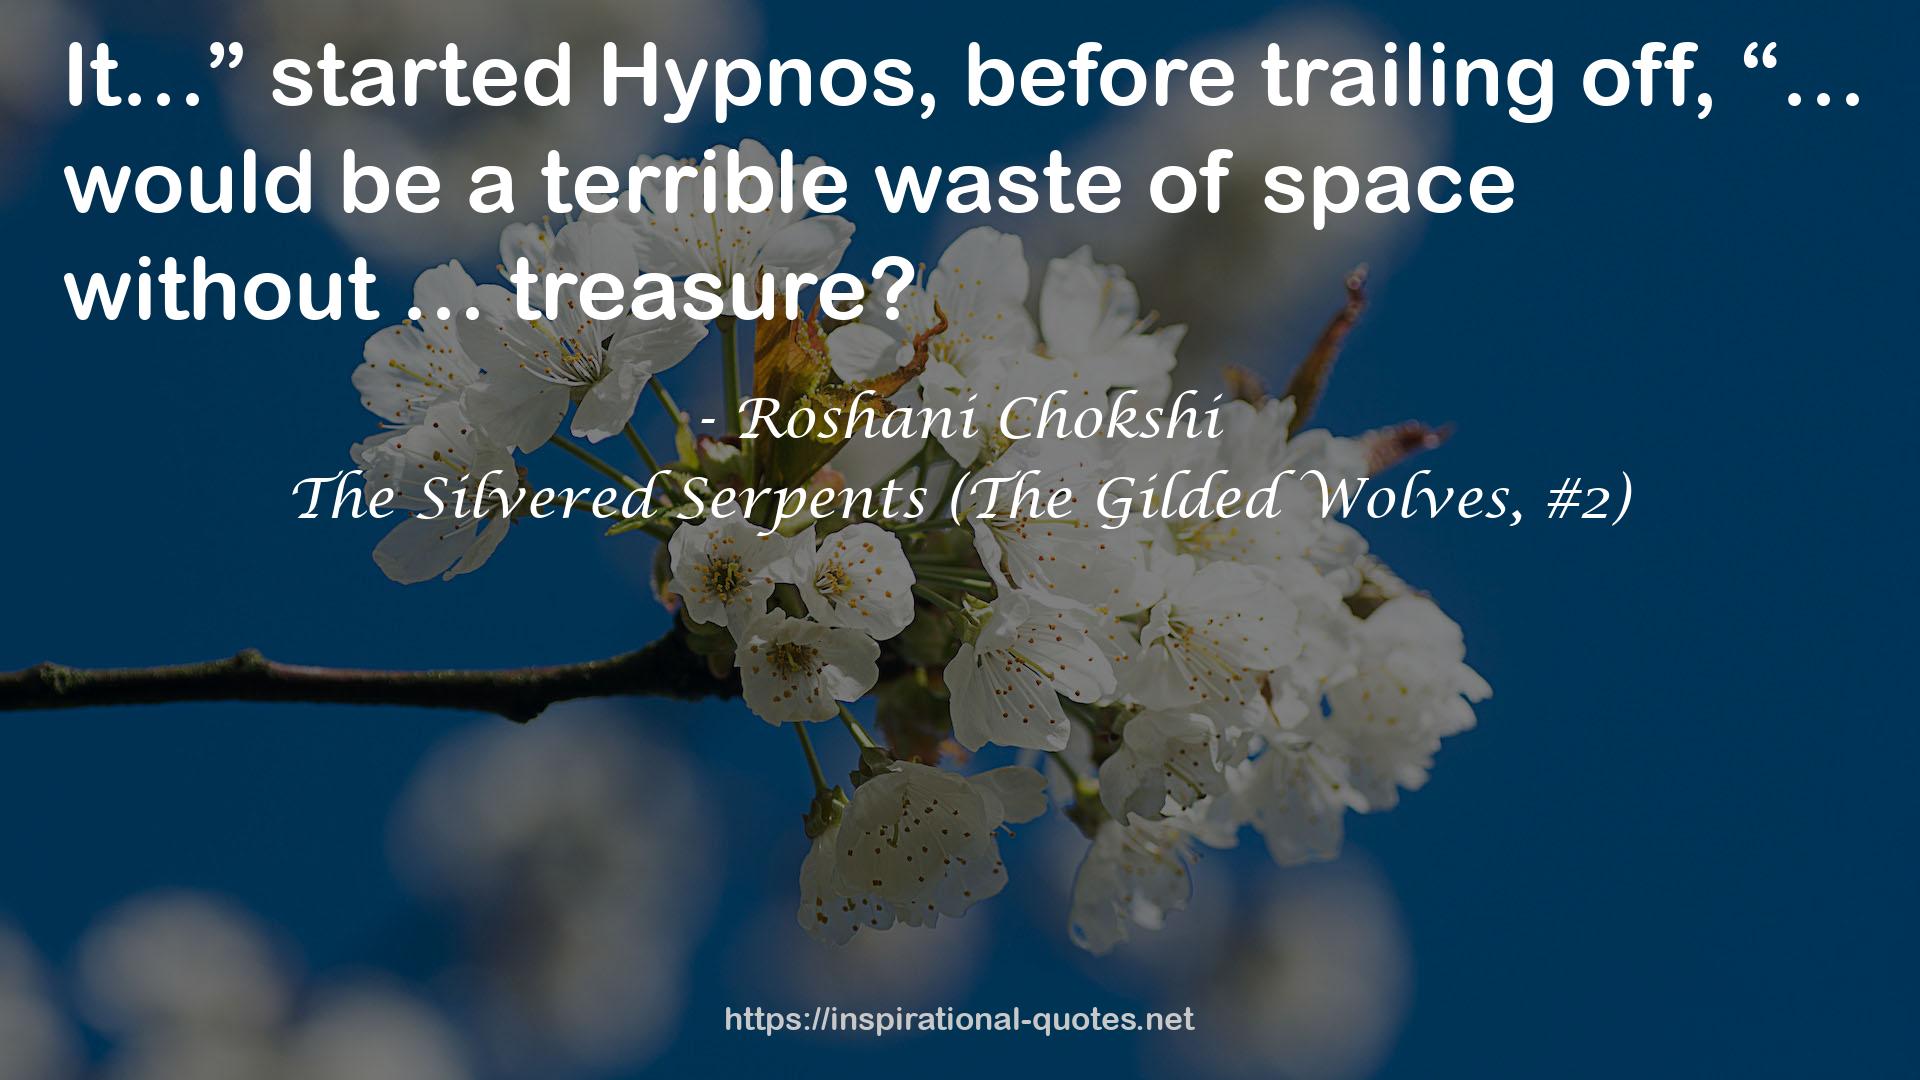 The Silvered Serpents (The Gilded Wolves, #2) QUOTES